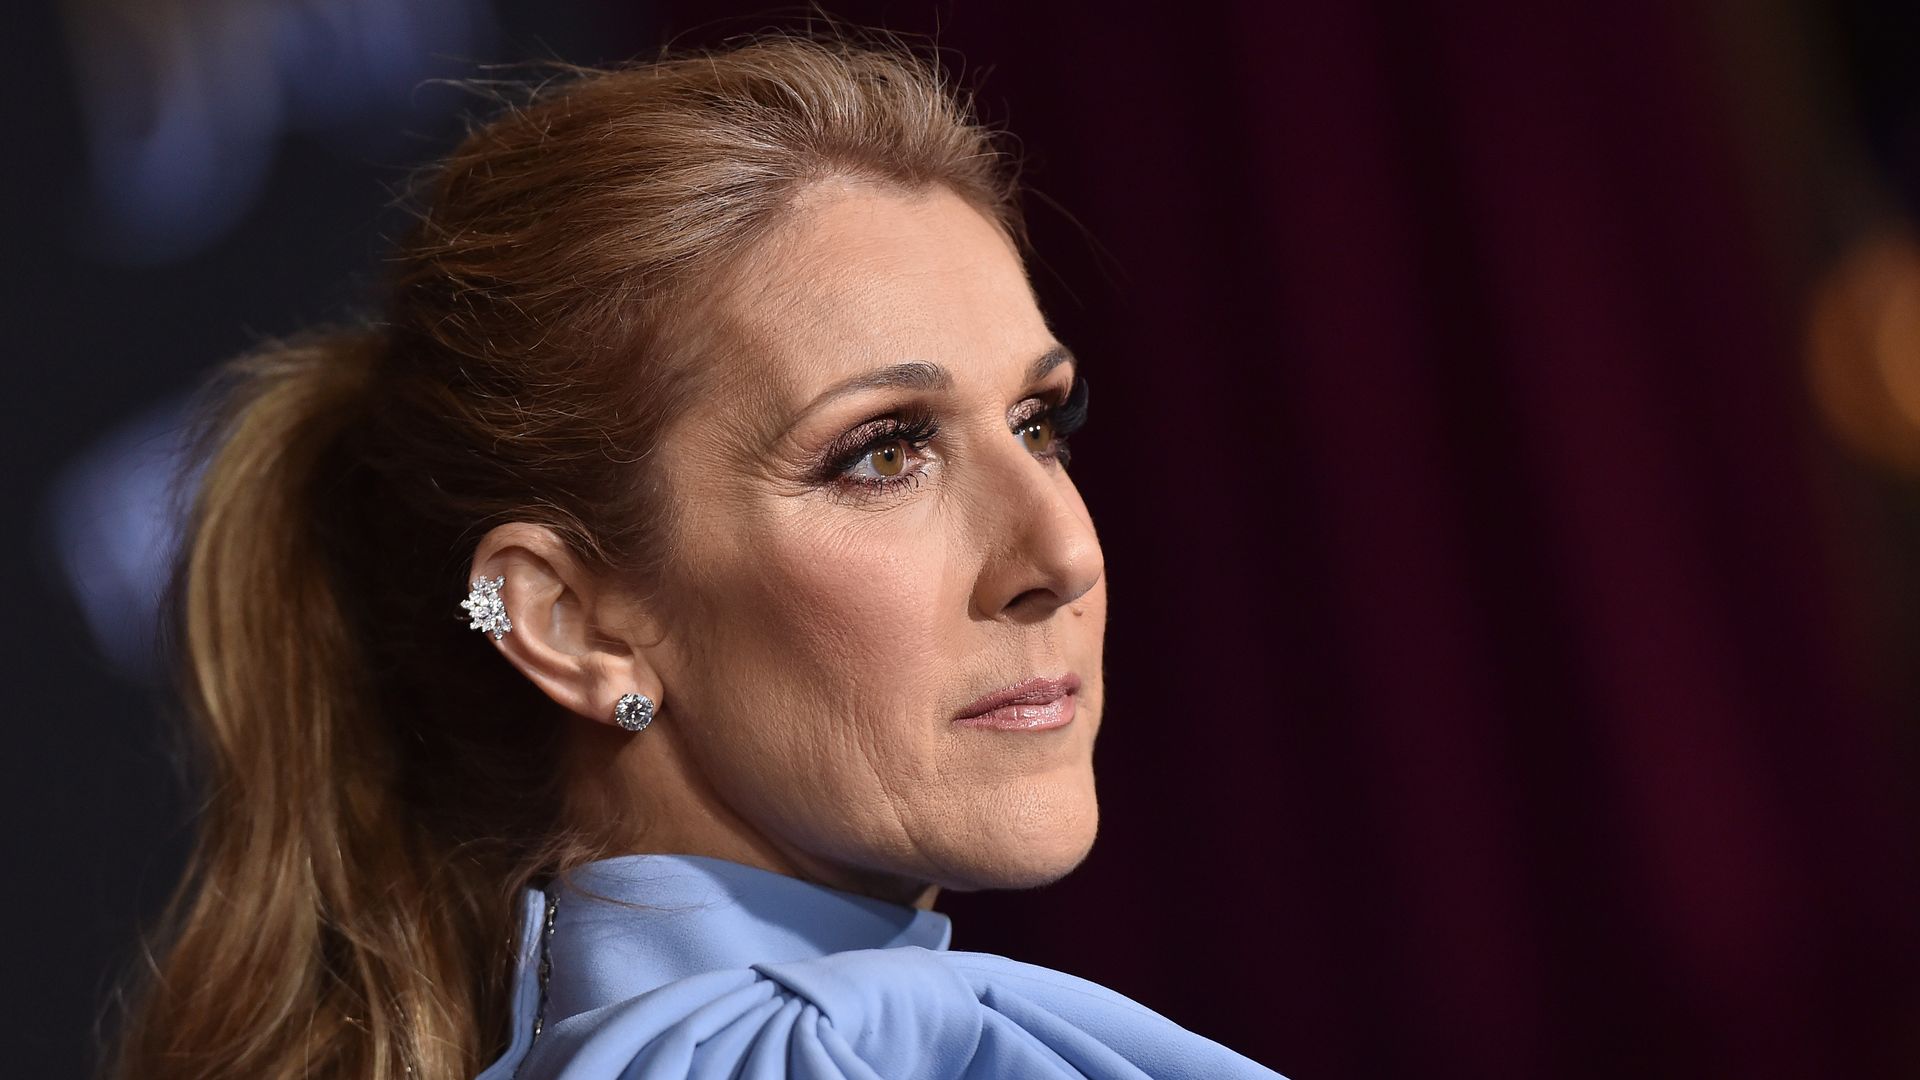 Celine Dion shares powerful personal message about 'overcoming challenges' for special Olympics appearance